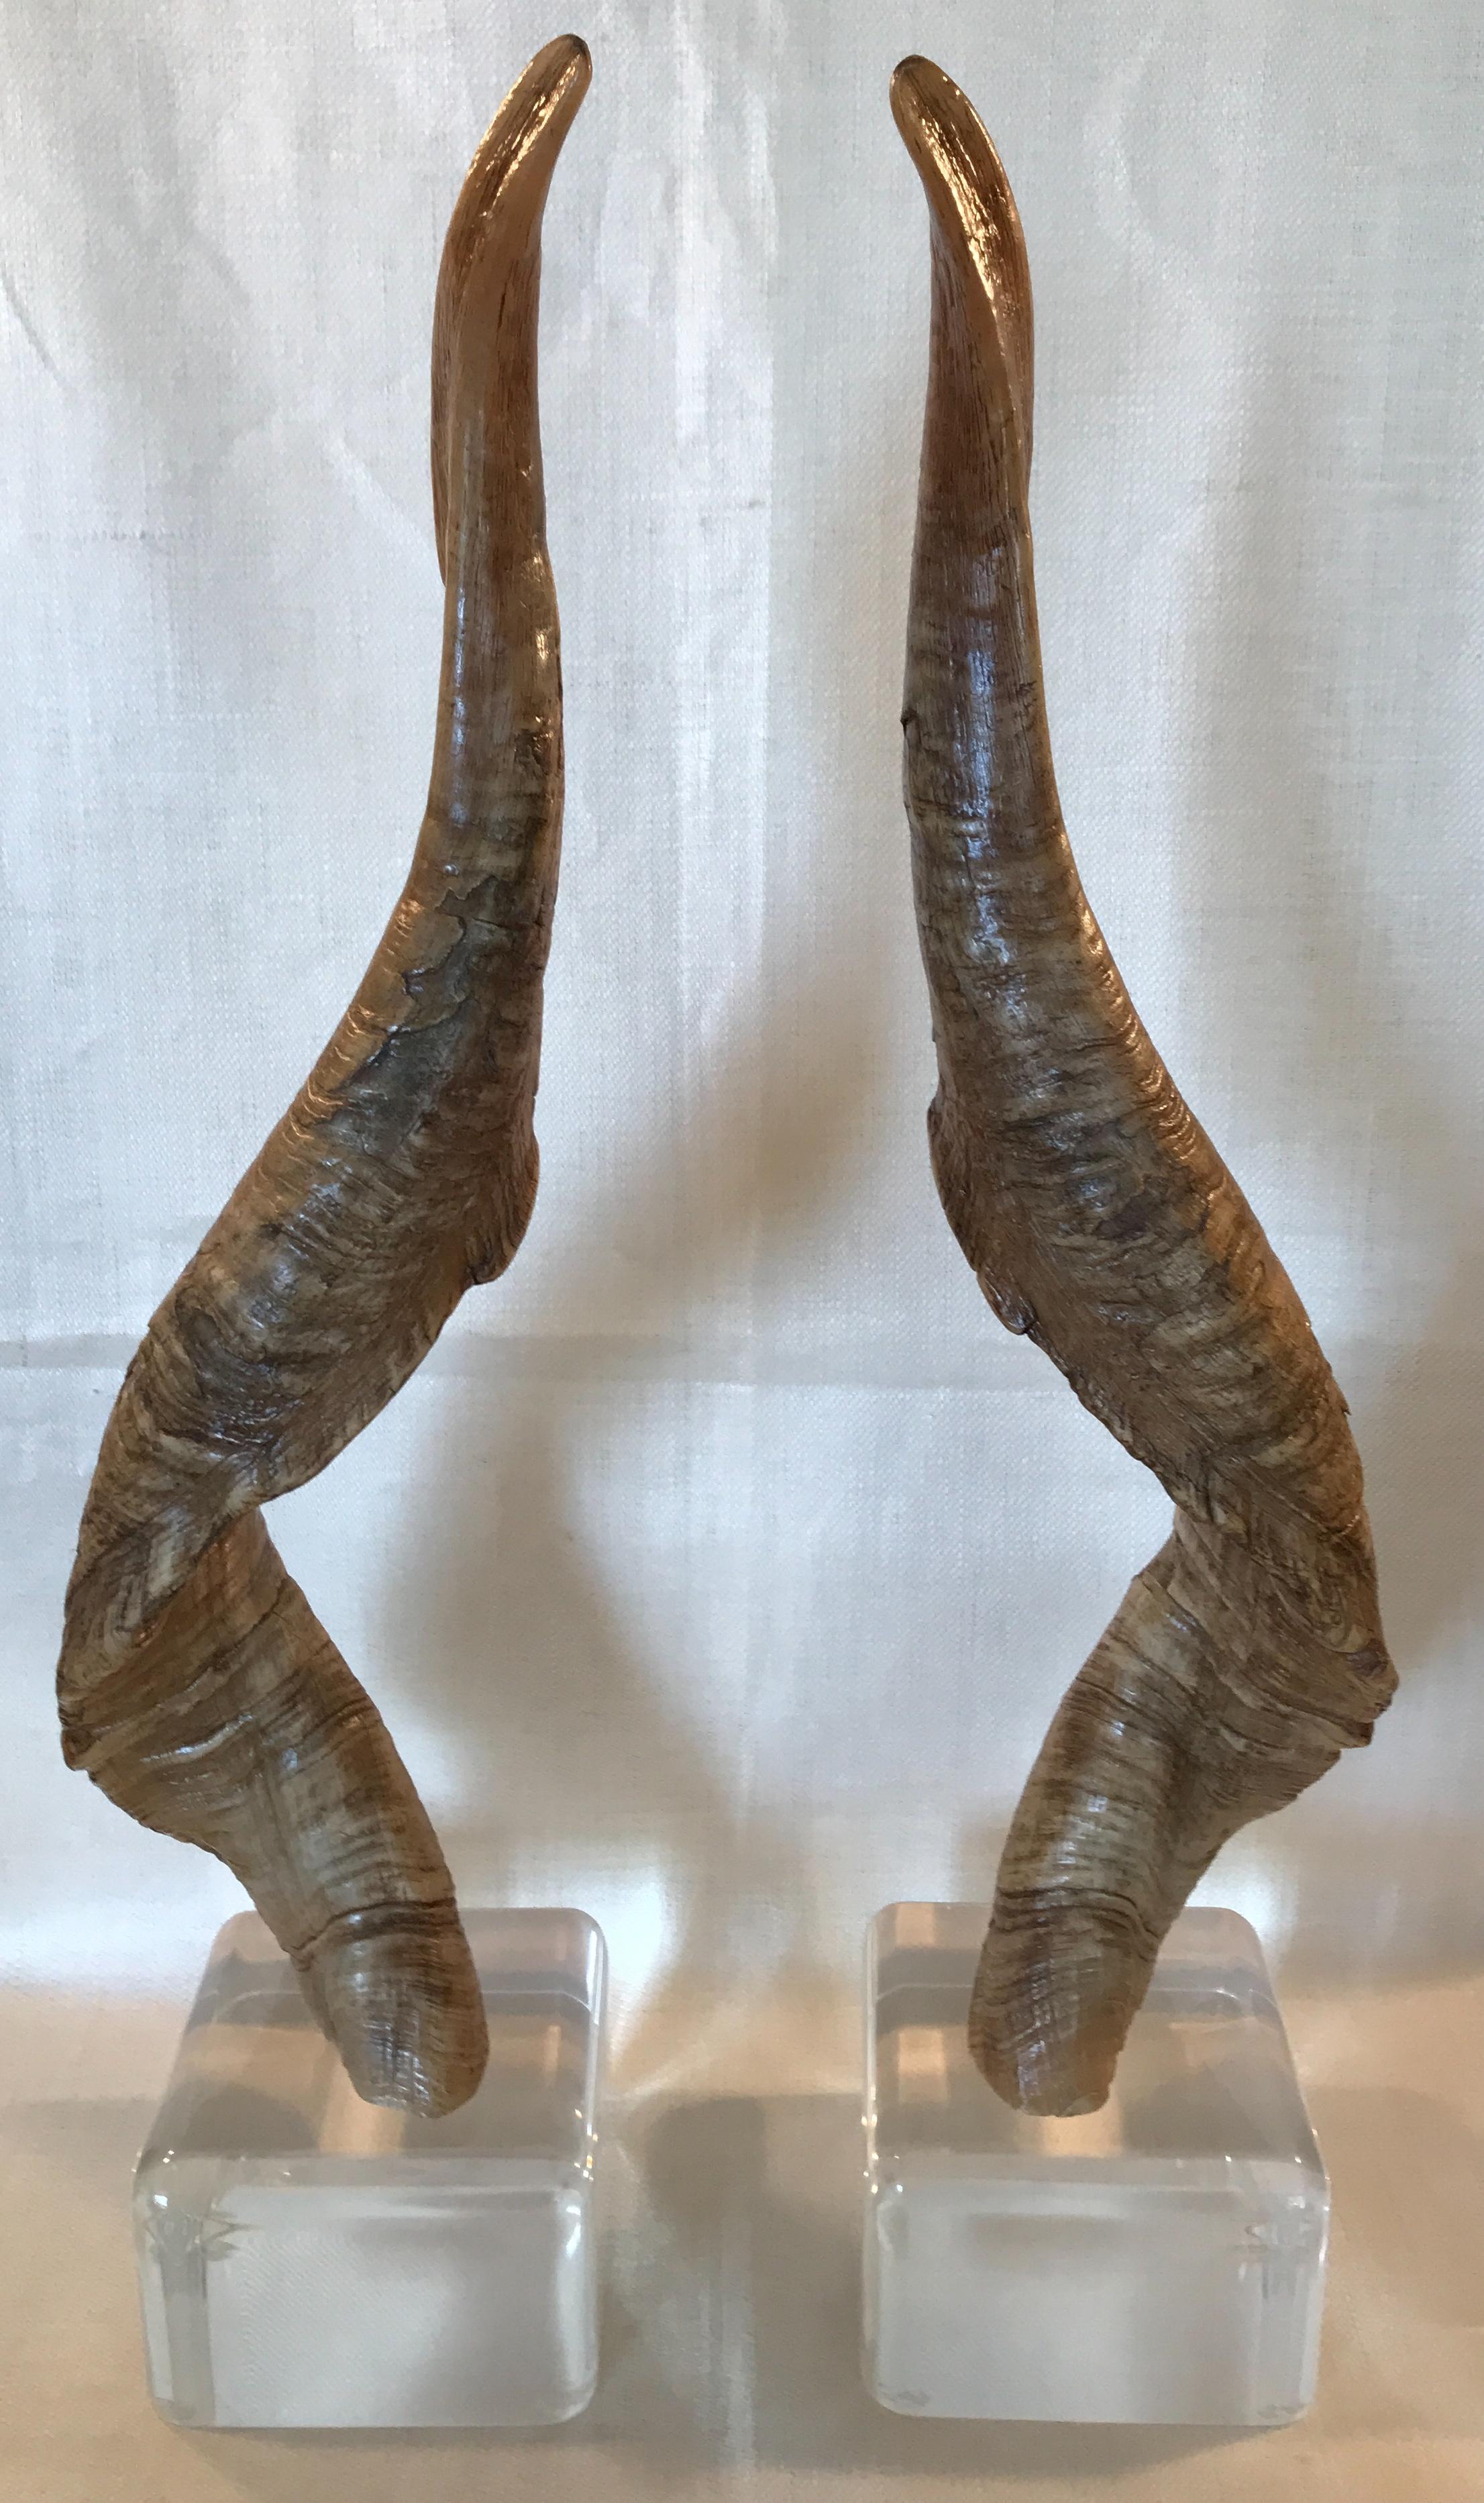 Vintage pair of spiralling Markhor goat horns mounted on square Lucite bases. Wonderful textured spiral horns with slight variations in color and mellowed patina, circa 1970s.

Markhors as found in Central Asia, Pakistan, Southern Russia.